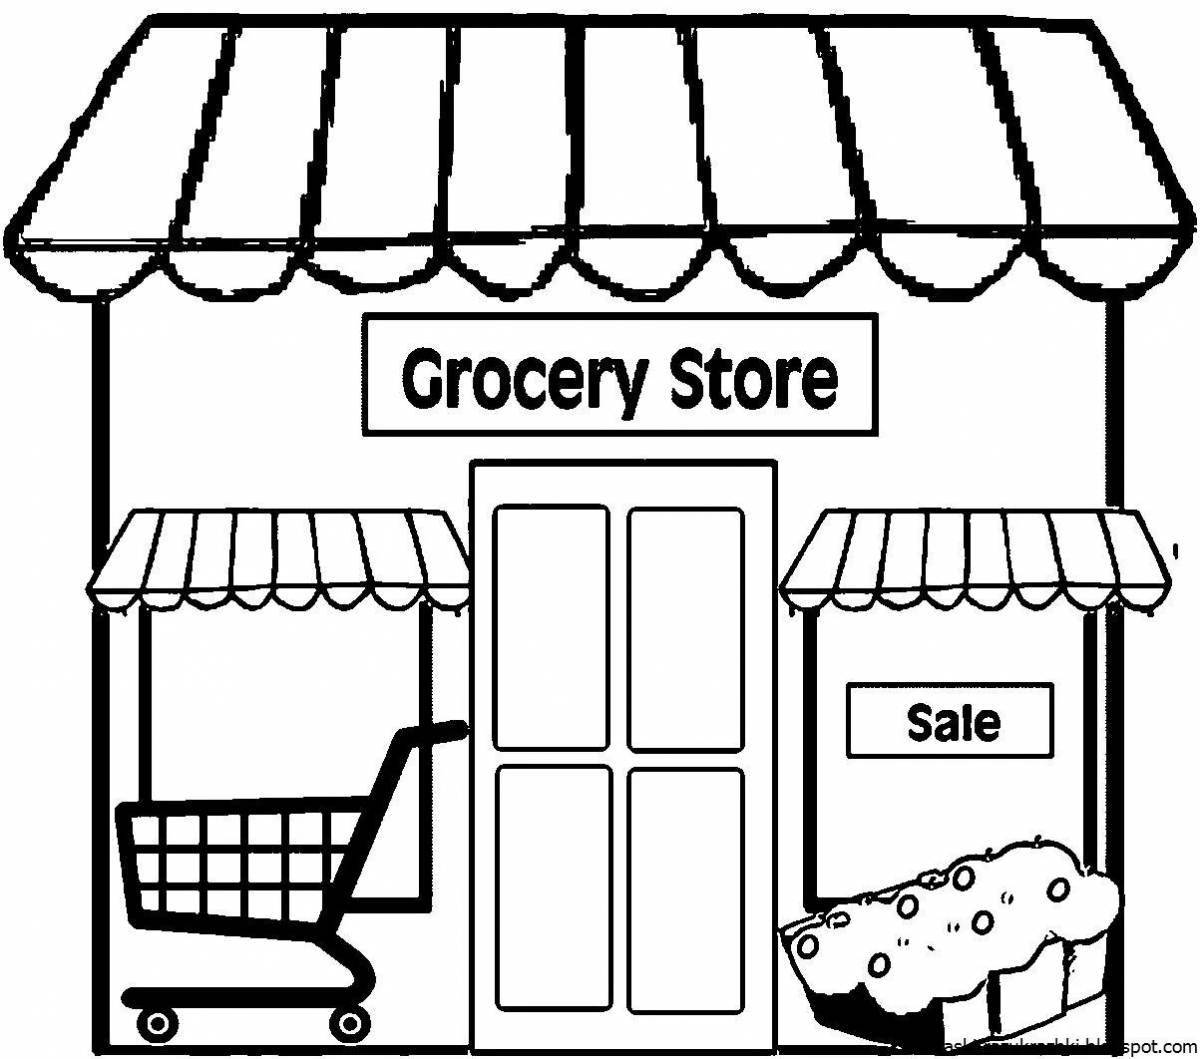 A fun grocery store coloring book for kids